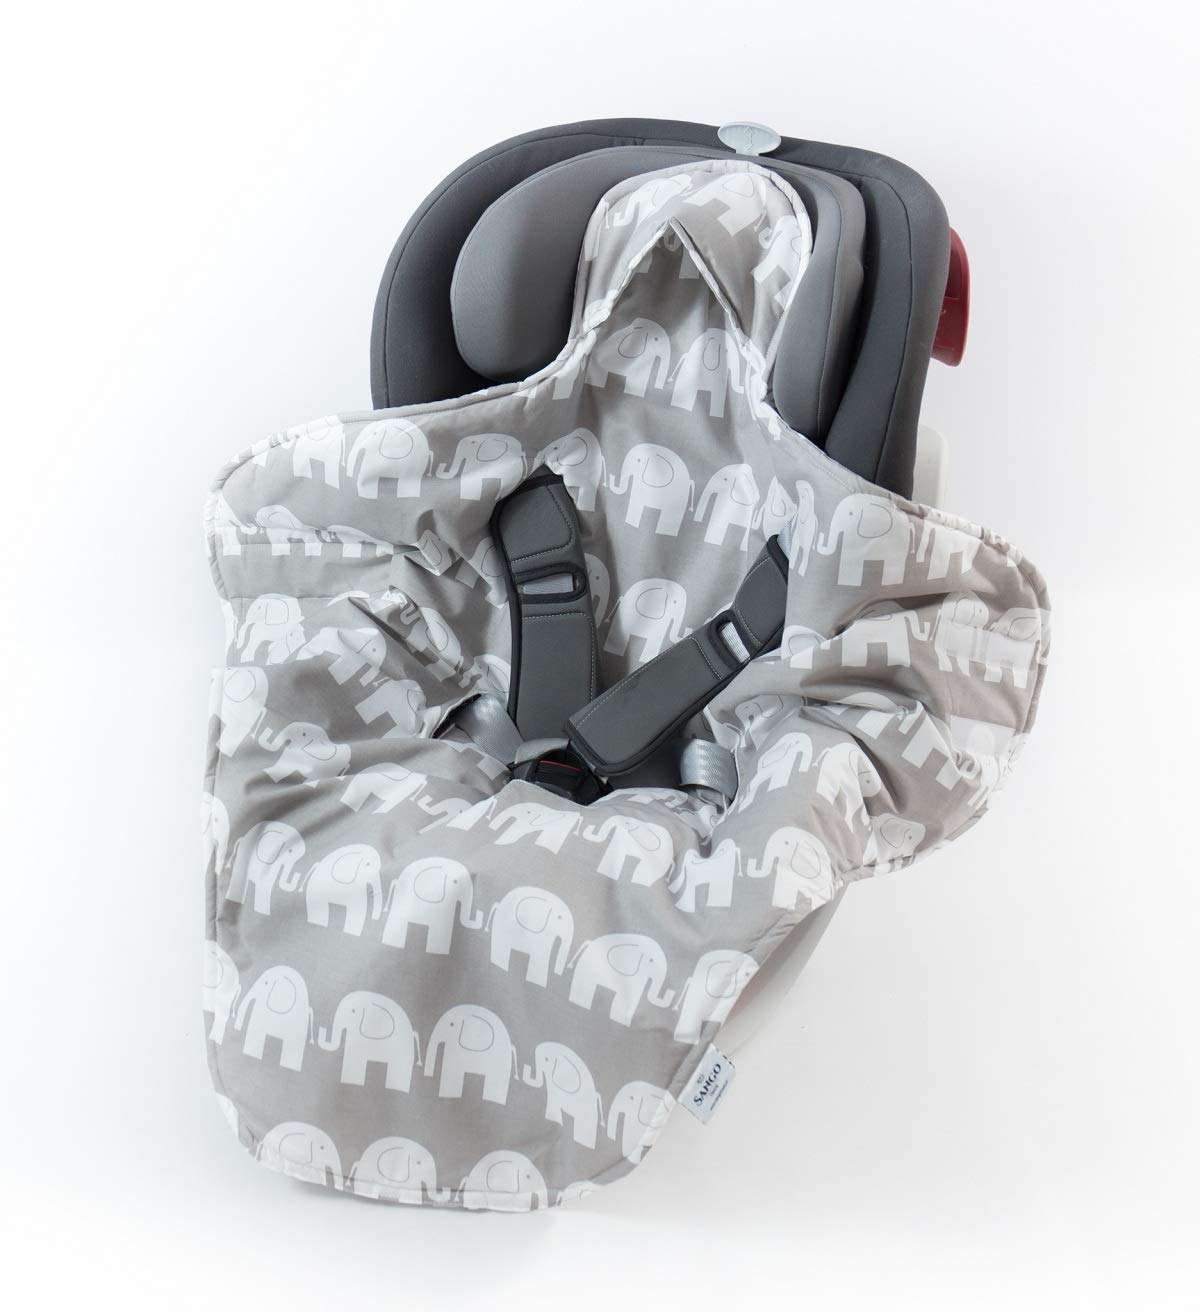 Sango Trade Baby Blanket for Car Seat Baby Carrier Pram Perfect During a Travel 100% Cotton Anti-Allergic Filling Soft 100 cm x 120 cm (Elephants)